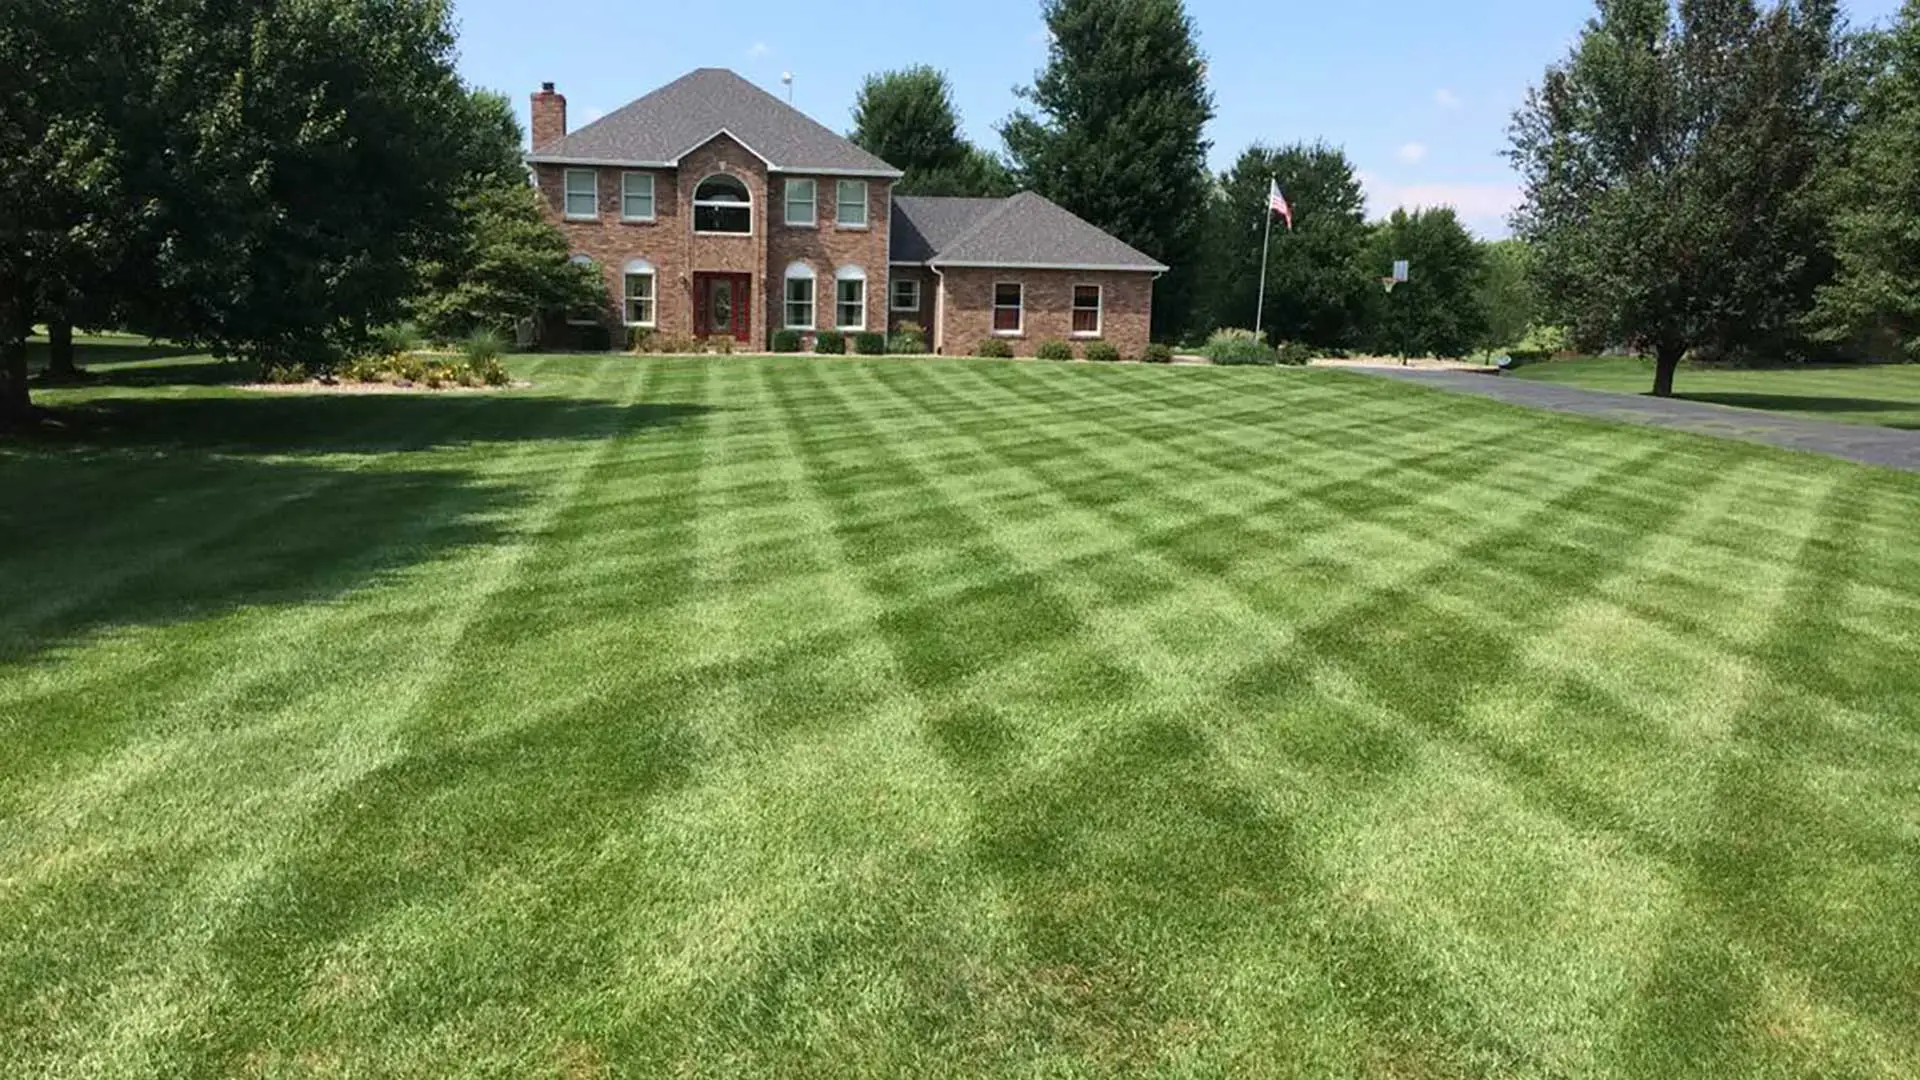 This lawn in Columbia, IL gets properly mowed each week by our staff.